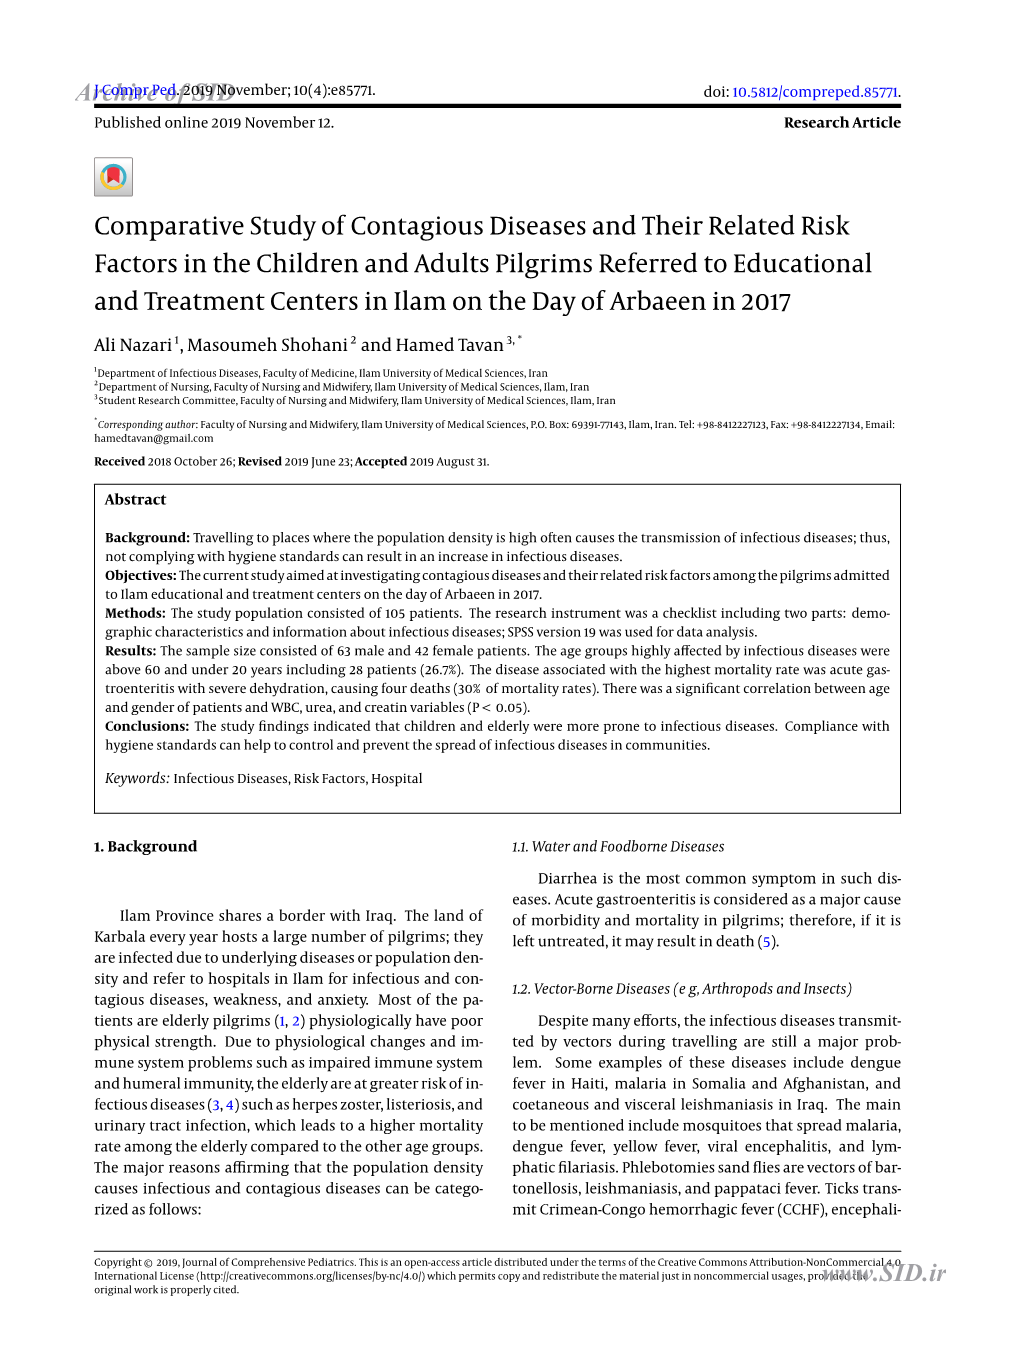 Comparative Study of Contagious Diseases and Their Related Risk